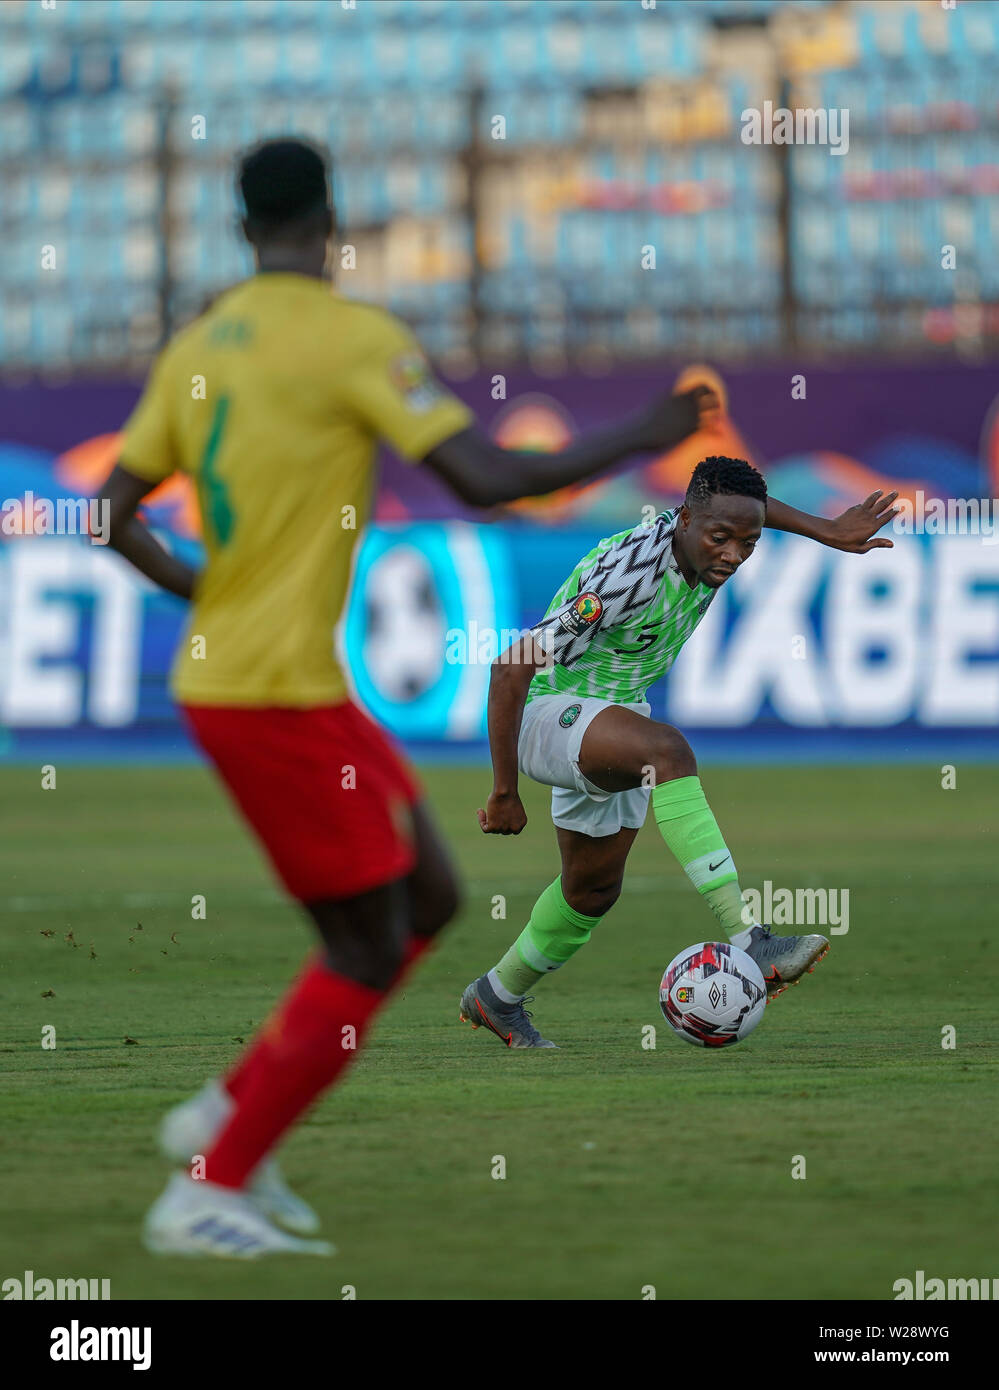 Alexandria, Egypt. 06th July, 2019. FRANCE OUT July 6, 2019: Ahmed Musa of Nigeria during the 2019 African Cup of Nations match between Cameroon and Nigeria at the Alexanddria Stadium in Alexandria, Egypt. Ulrik Pedersen/CSM. Credit: Cal Sport Media/Alamy Live News Stock Photo